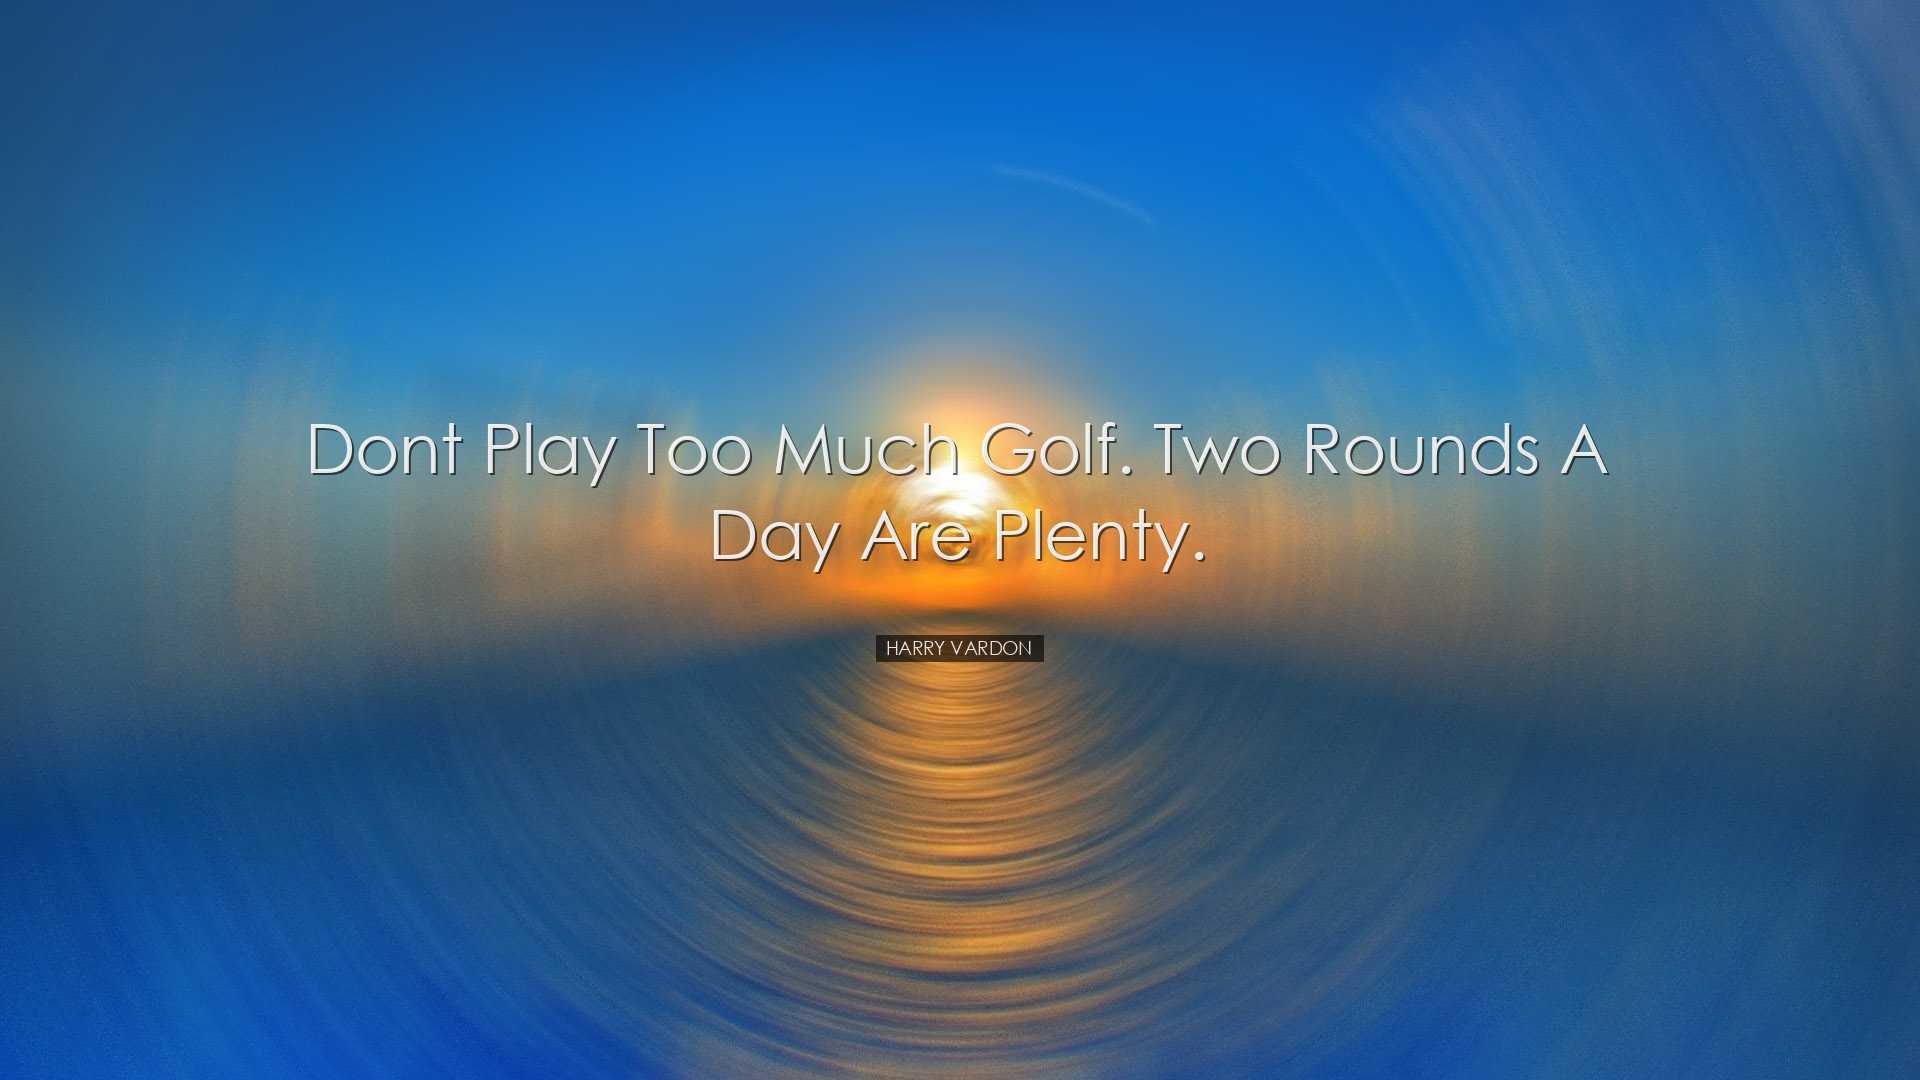 Dont play too much golf. Two rounds a day are plenty. - Harry Vard